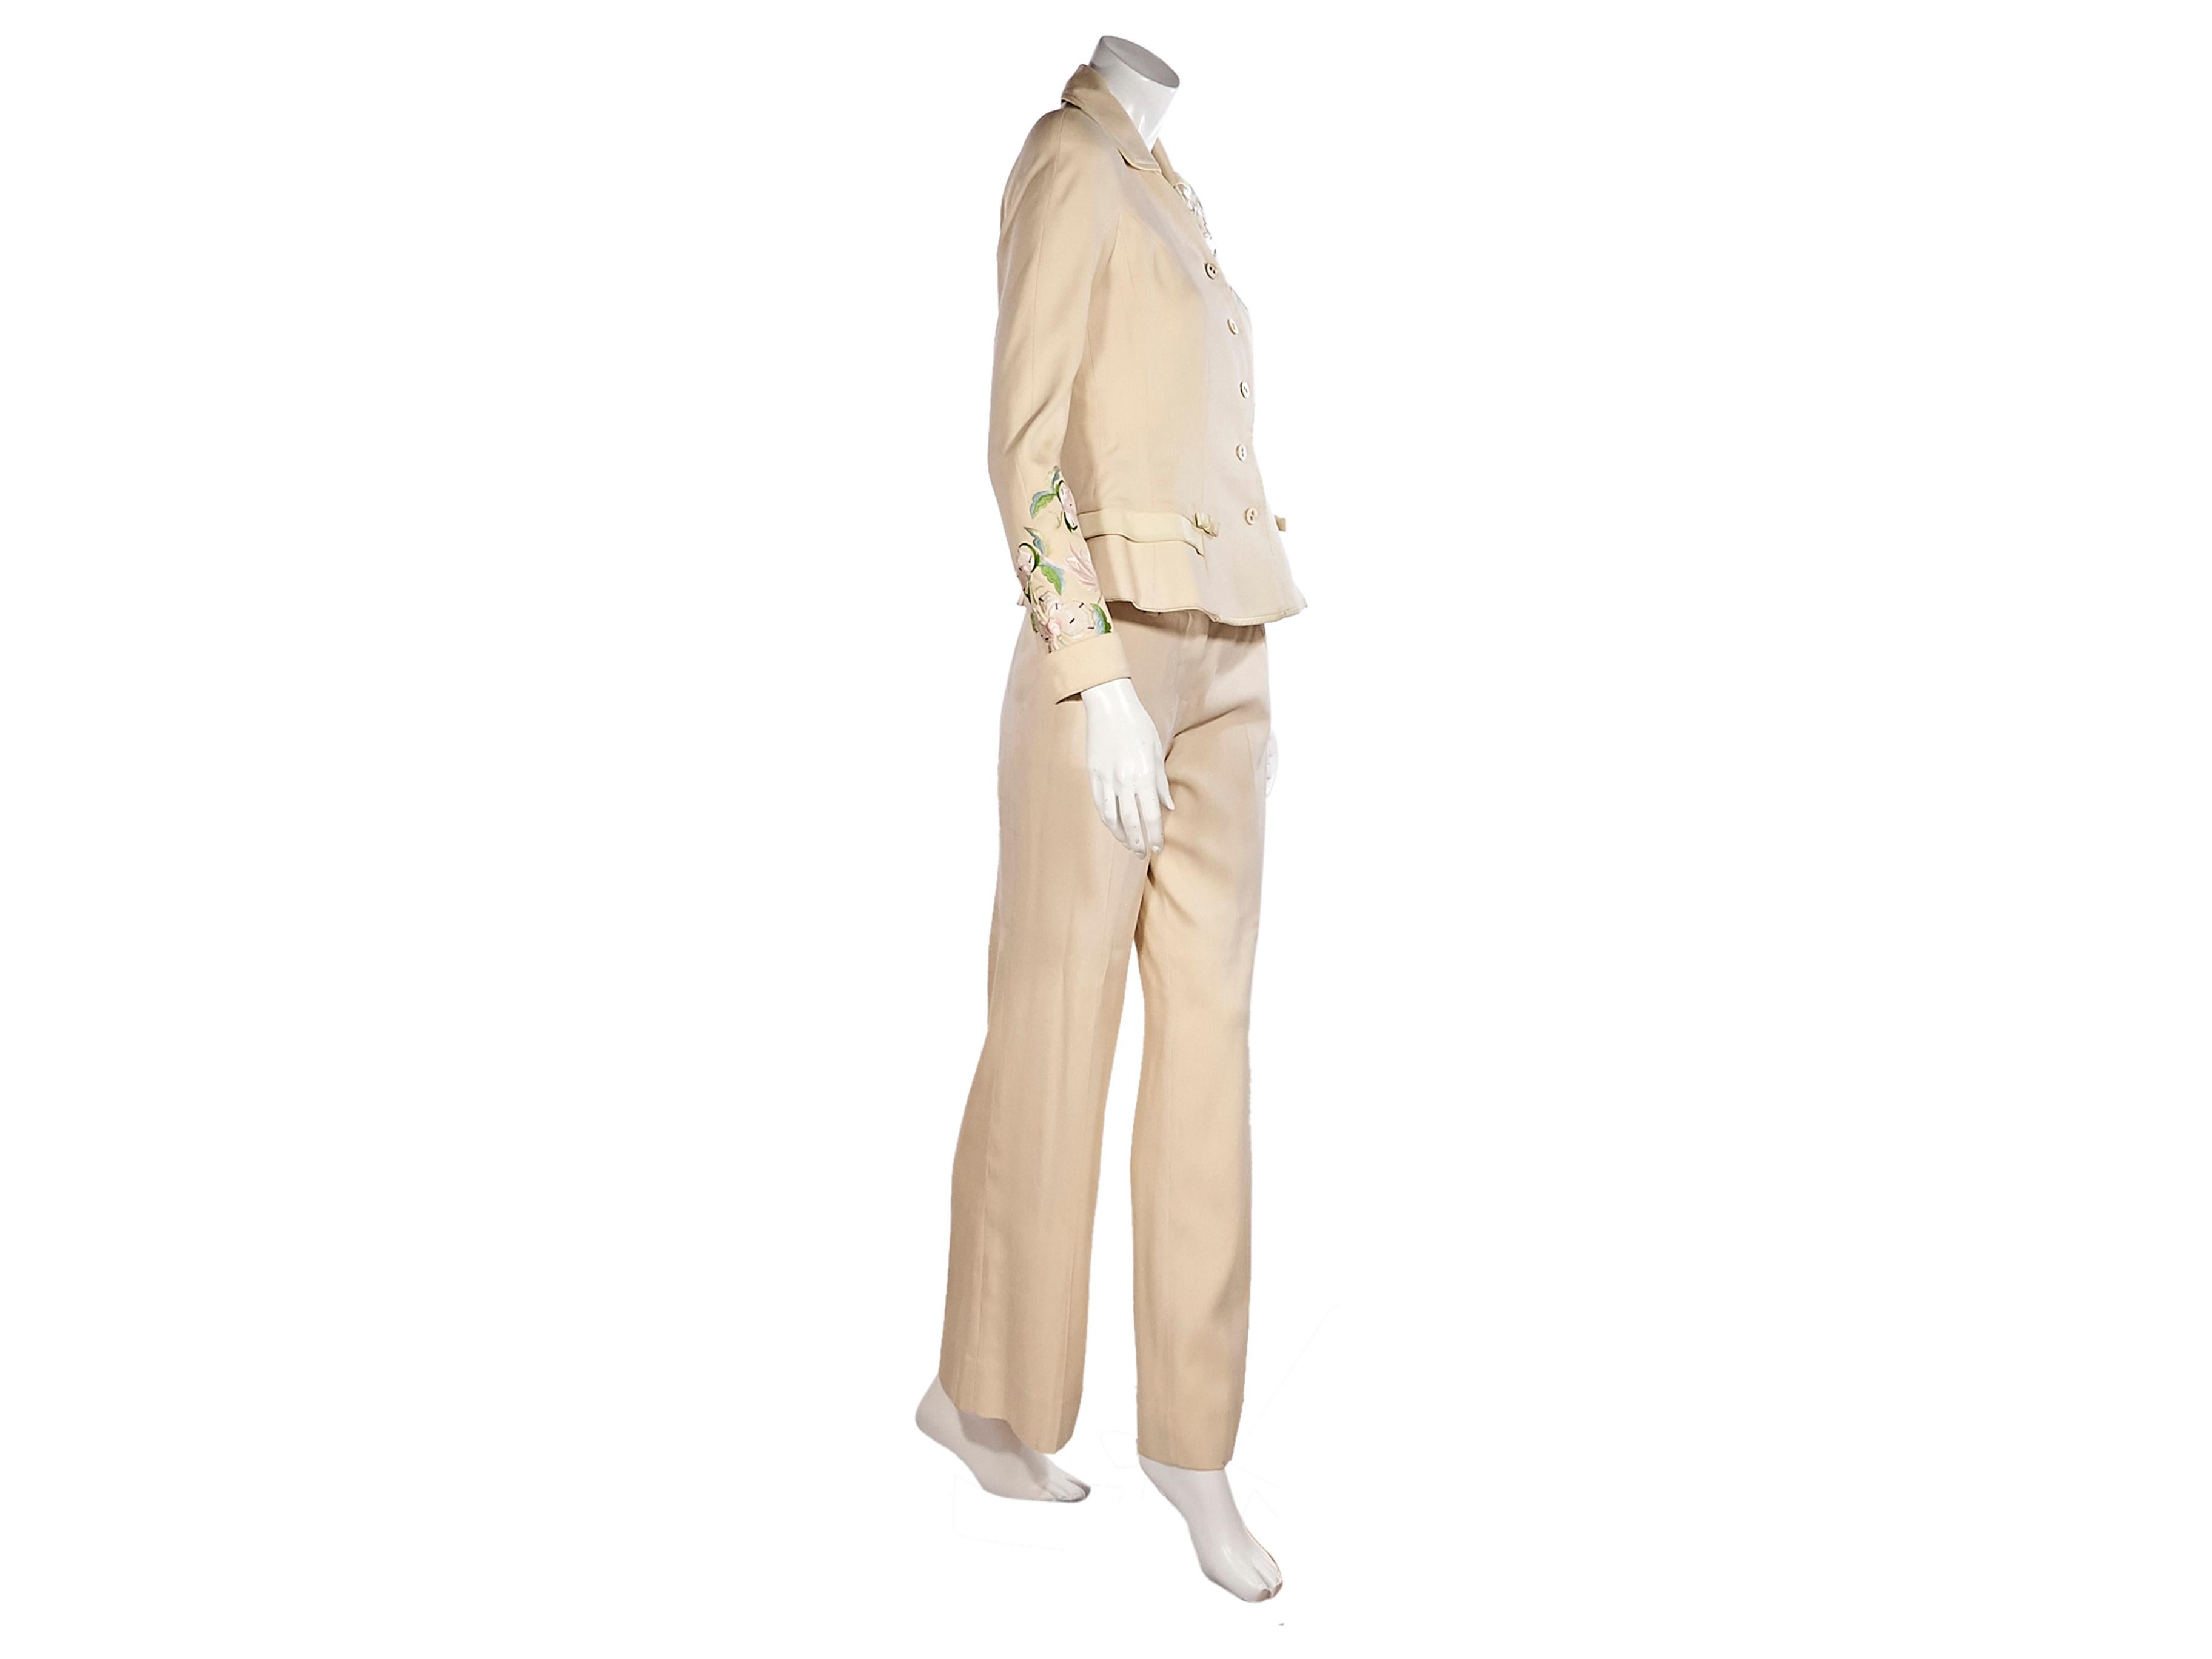 Product details:  Cream silk floral-embroidered suit by Christian Dior.  Trimmed with leather.  Spread collar.  Long sleeves.  Button-front closure.  Back hem slits.  Matching dress pants.  Banded waist with belt loops.  Concealed hook and zip